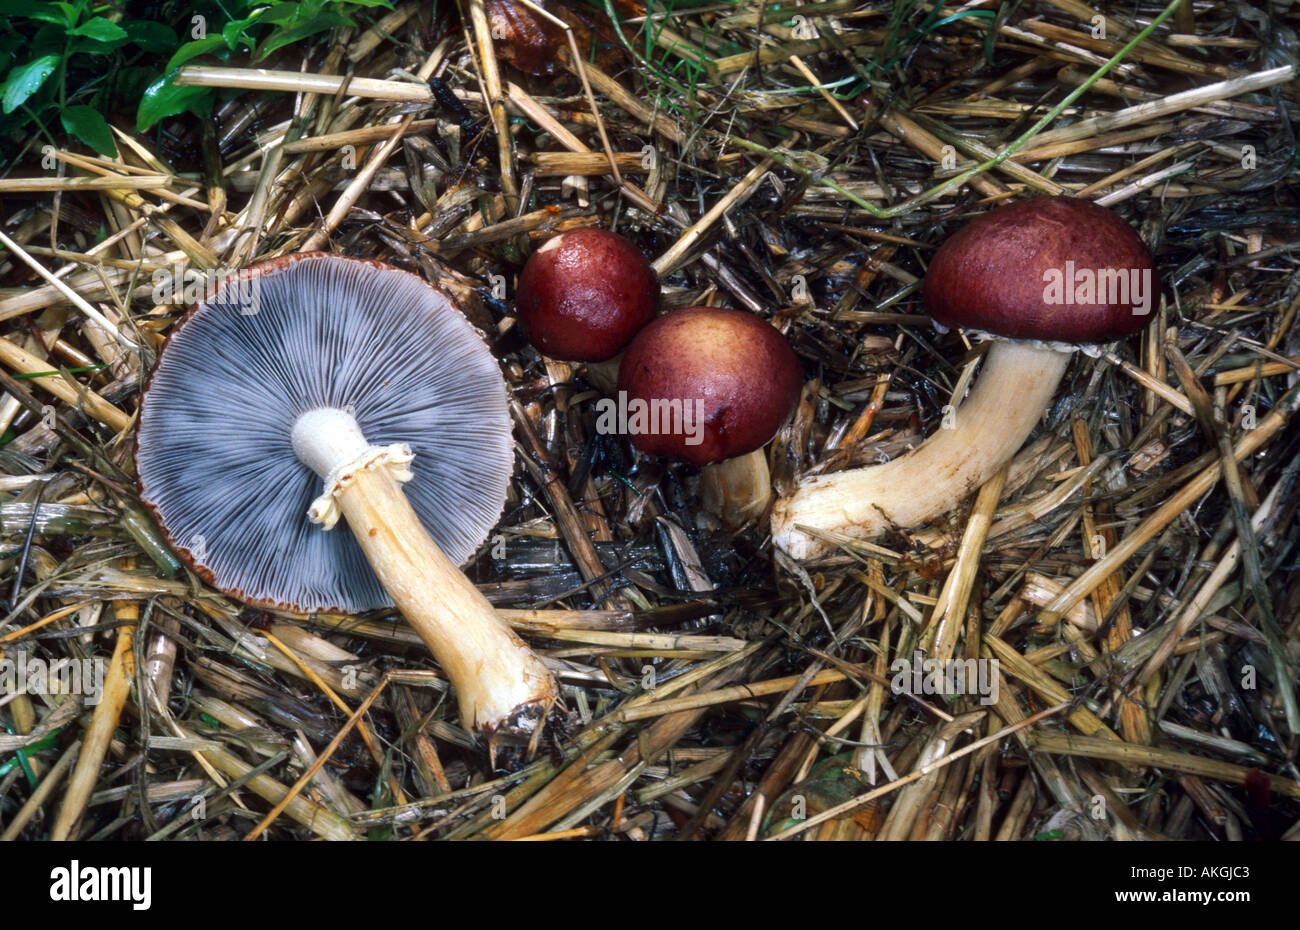 roundhead (Stropharia rugosoannulata), four fruiting bodies on straw, Germany Stock Photo